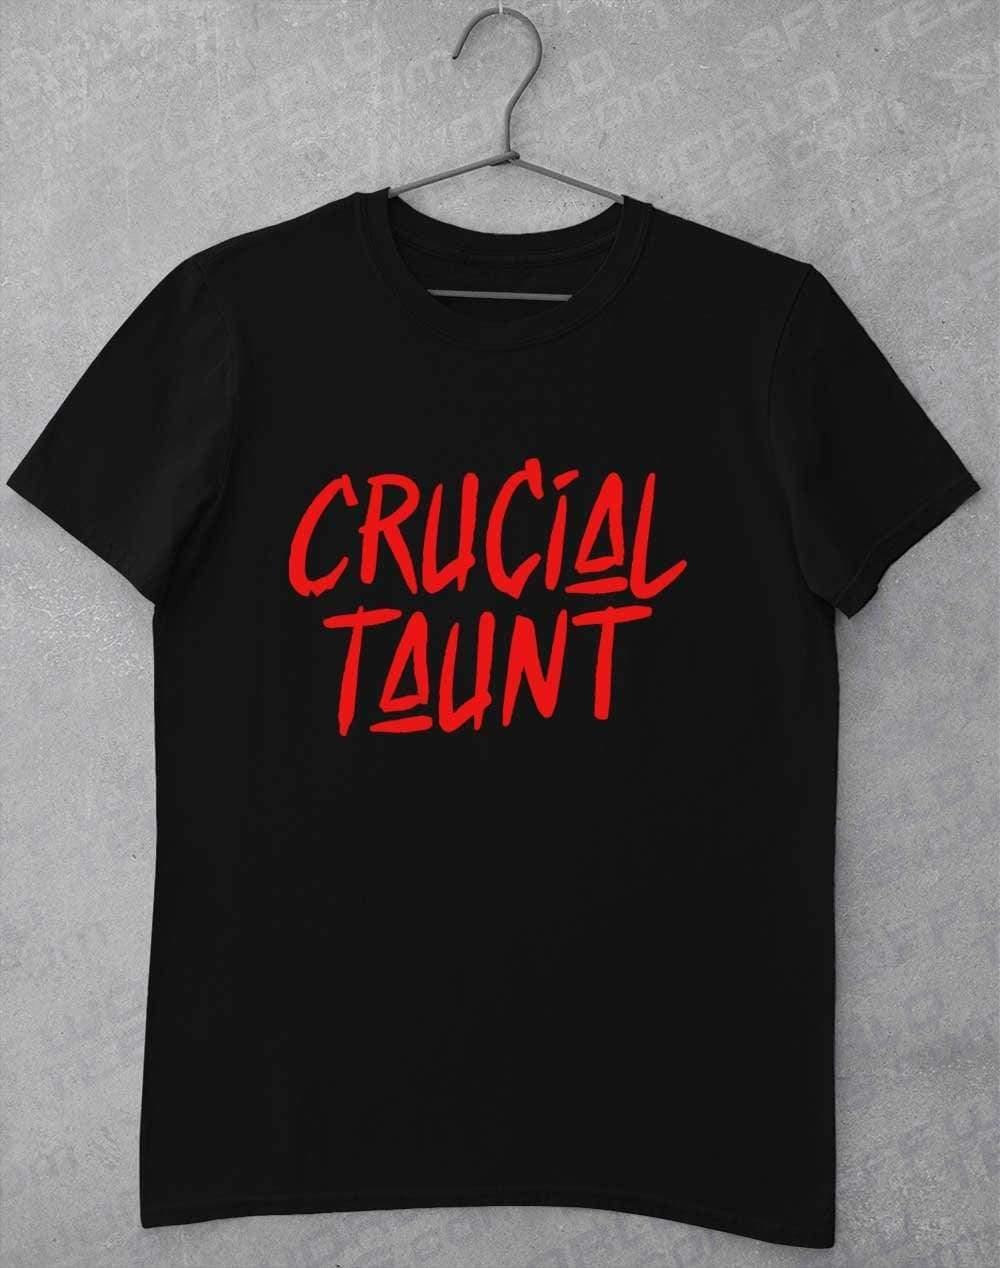 Crucial Taunt T-Shirt S / Black  - Off World Tees